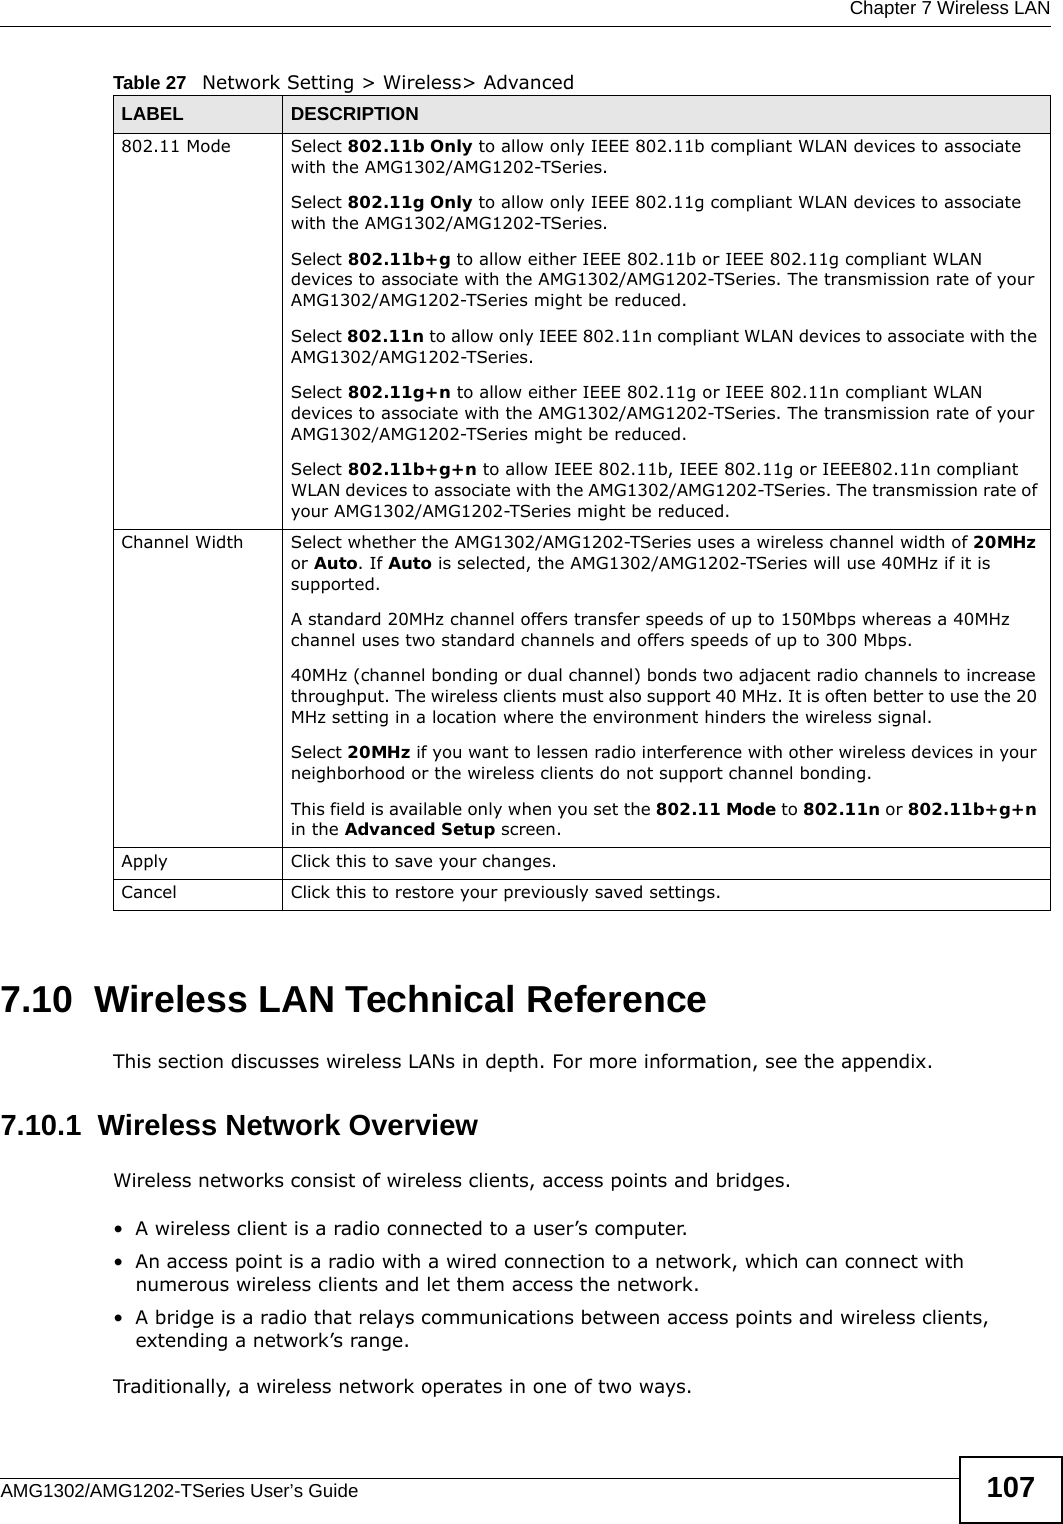  Chapter 7 Wireless LANAMG1302/AMG1202-TSeries User’s Guide 1077.10  Wireless LAN Technical ReferenceThis section discusses wireless LANs in depth. For more information, see the appendix.7.10.1  Wireless Network OverviewWireless networks consist of wireless clients, access points and bridges. • A wireless client is a radio connected to a user’s computer. • An access point is a radio with a wired connection to a network, which can connect with numerous wireless clients and let them access the network. • A bridge is a radio that relays communications between access points and wireless clients, extending a network’s range. Traditionally, a wireless network operates in one of two ways.802.11 Mode Select 802.11b Only to allow only IEEE 802.11b compliant WLAN devices to associate with the AMG1302/AMG1202-TSeries.Select 802.11g Only to allow only IEEE 802.11g compliant WLAN devices to associate with the AMG1302/AMG1202-TSeries.Select 802.11b+g to allow either IEEE 802.11b or IEEE 802.11g compliant WLAN devices to associate with the AMG1302/AMG1202-TSeries. The transmission rate of your AMG1302/AMG1202-TSeries might be reduced.Select 802.11n to allow only IEEE 802.11n compliant WLAN devices to associate with the AMG1302/AMG1202-TSeries.Select 802.11g+n to allow either IEEE 802.11g or IEEE 802.11n compliant WLAN devices to associate with the AMG1302/AMG1202-TSeries. The transmission rate of your AMG1302/AMG1202-TSeries might be reduced.Select 802.11b+g+n to allow IEEE 802.11b, IEEE 802.11g or IEEE802.11n compliant WLAN devices to associate with the AMG1302/AMG1202-TSeries. The transmission rate of your AMG1302/AMG1202-TSeries might be reduced.Channel Width Select whether the AMG1302/AMG1202-TSeries uses a wireless channel width of 20MHz or Auto. If Auto is selected, the AMG1302/AMG1202-TSeries will use 40MHz if it is supported.A standard 20MHz channel offers transfer speeds of up to 150Mbps whereas a 40MHz channel uses two standard channels and offers speeds of up to 300 Mbps. 40MHz (channel bonding or dual channel) bonds two adjacent radio channels to increase throughput. The wireless clients must also support 40 MHz. It is often better to use the 20 MHz setting in a location where the environment hinders the wireless signal. Select 20MHz if you want to lessen radio interference with other wireless devices in your neighborhood or the wireless clients do not support channel bonding.This field is available only when you set the 802.11 Mode to 802.11n or 802.11b+g+n in the Advanced Setup screen.Apply Click this to save your changes.Cancel Click this to restore your previously saved settings.Table 27   Network Setting &gt; Wireless&gt; AdvancedLABEL DESCRIPTION